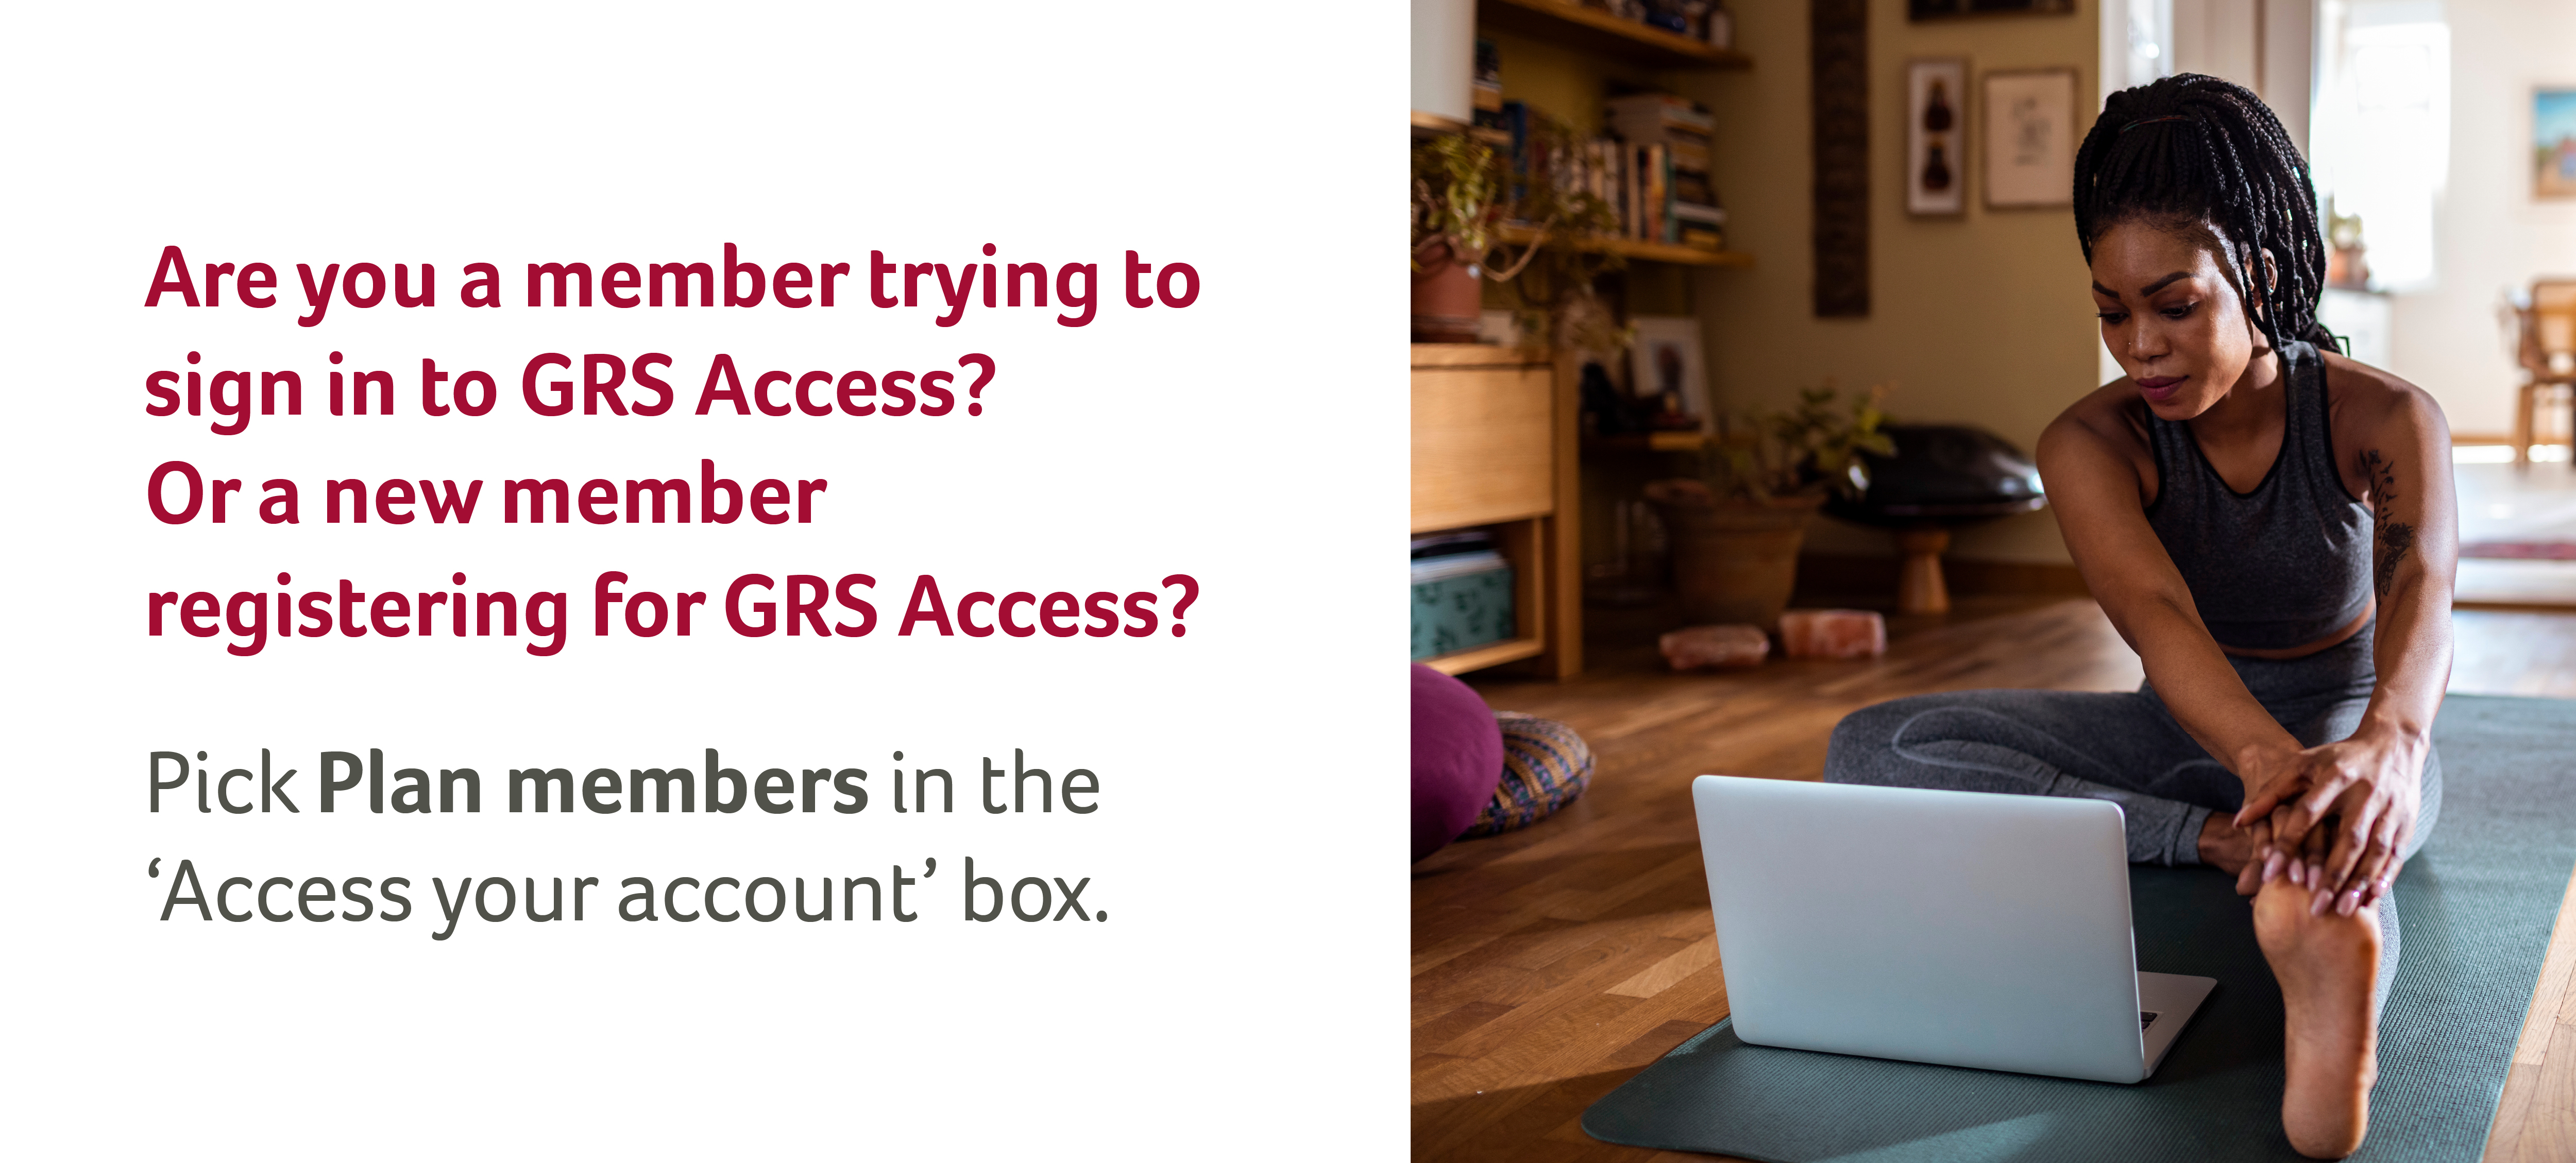 Are you a member trying to sign in to GRS Access? Or a new member registering for GRS Access? Pick plan members in the "access your account" box.